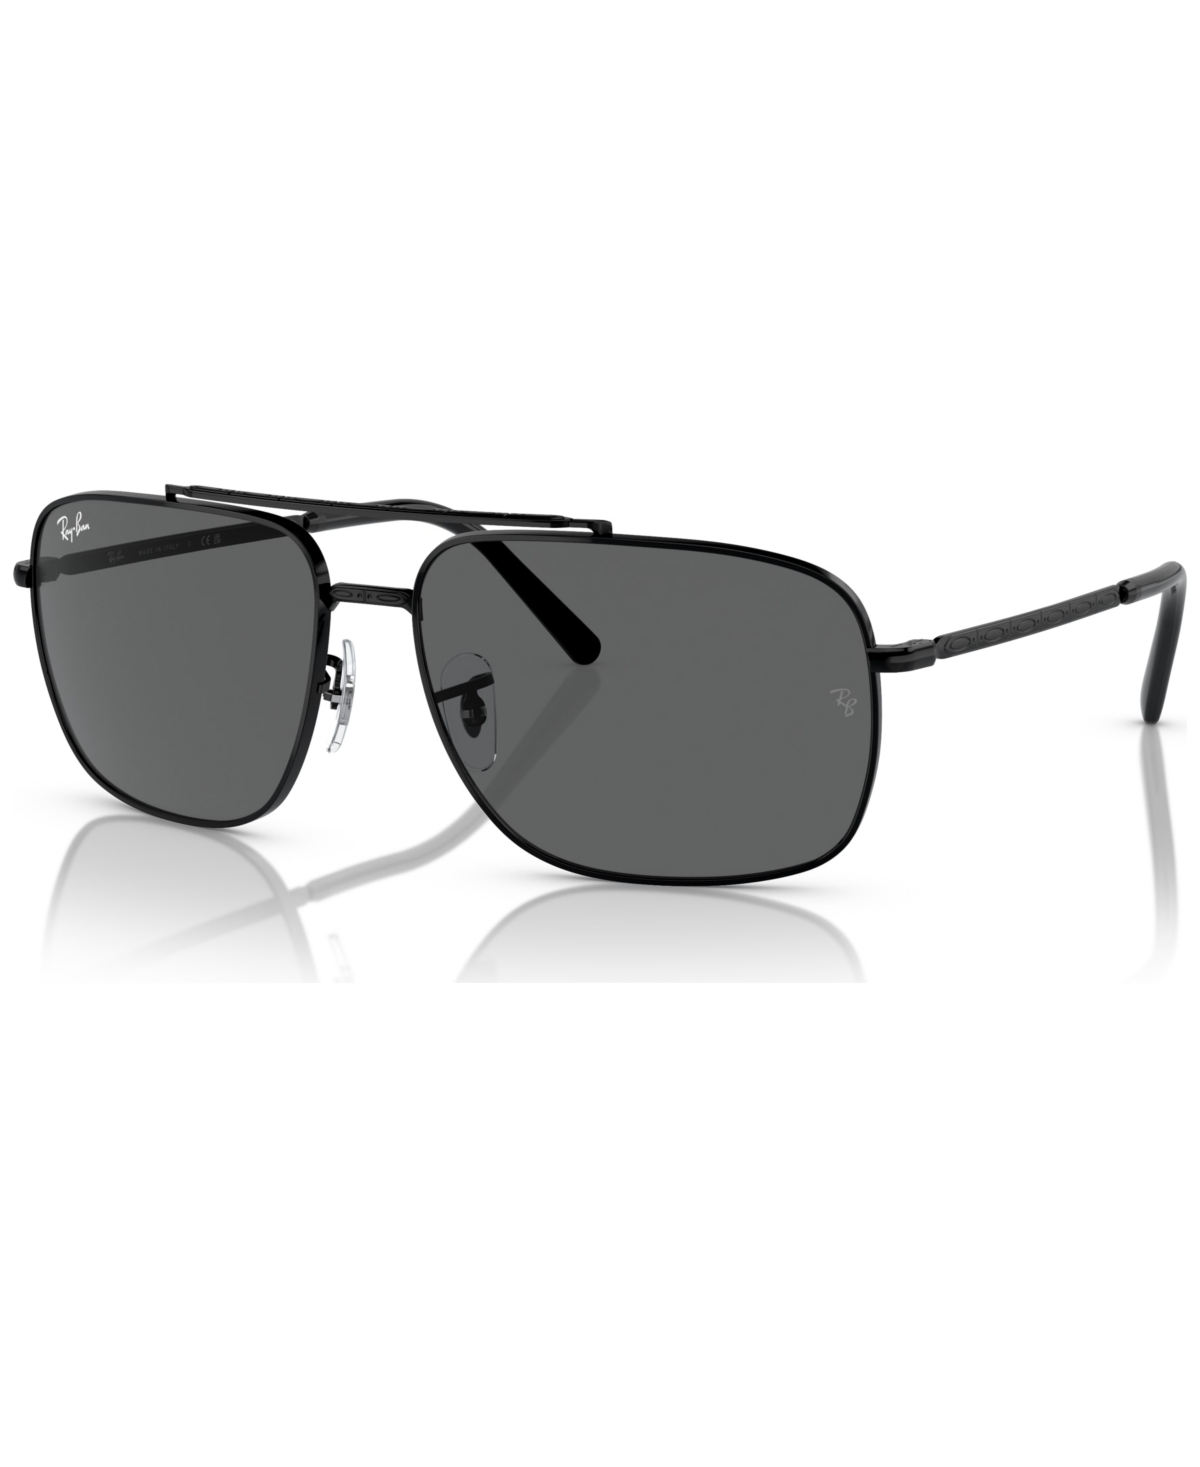 Ray Ban Unisex Sunglasses, Rb3796 In Black